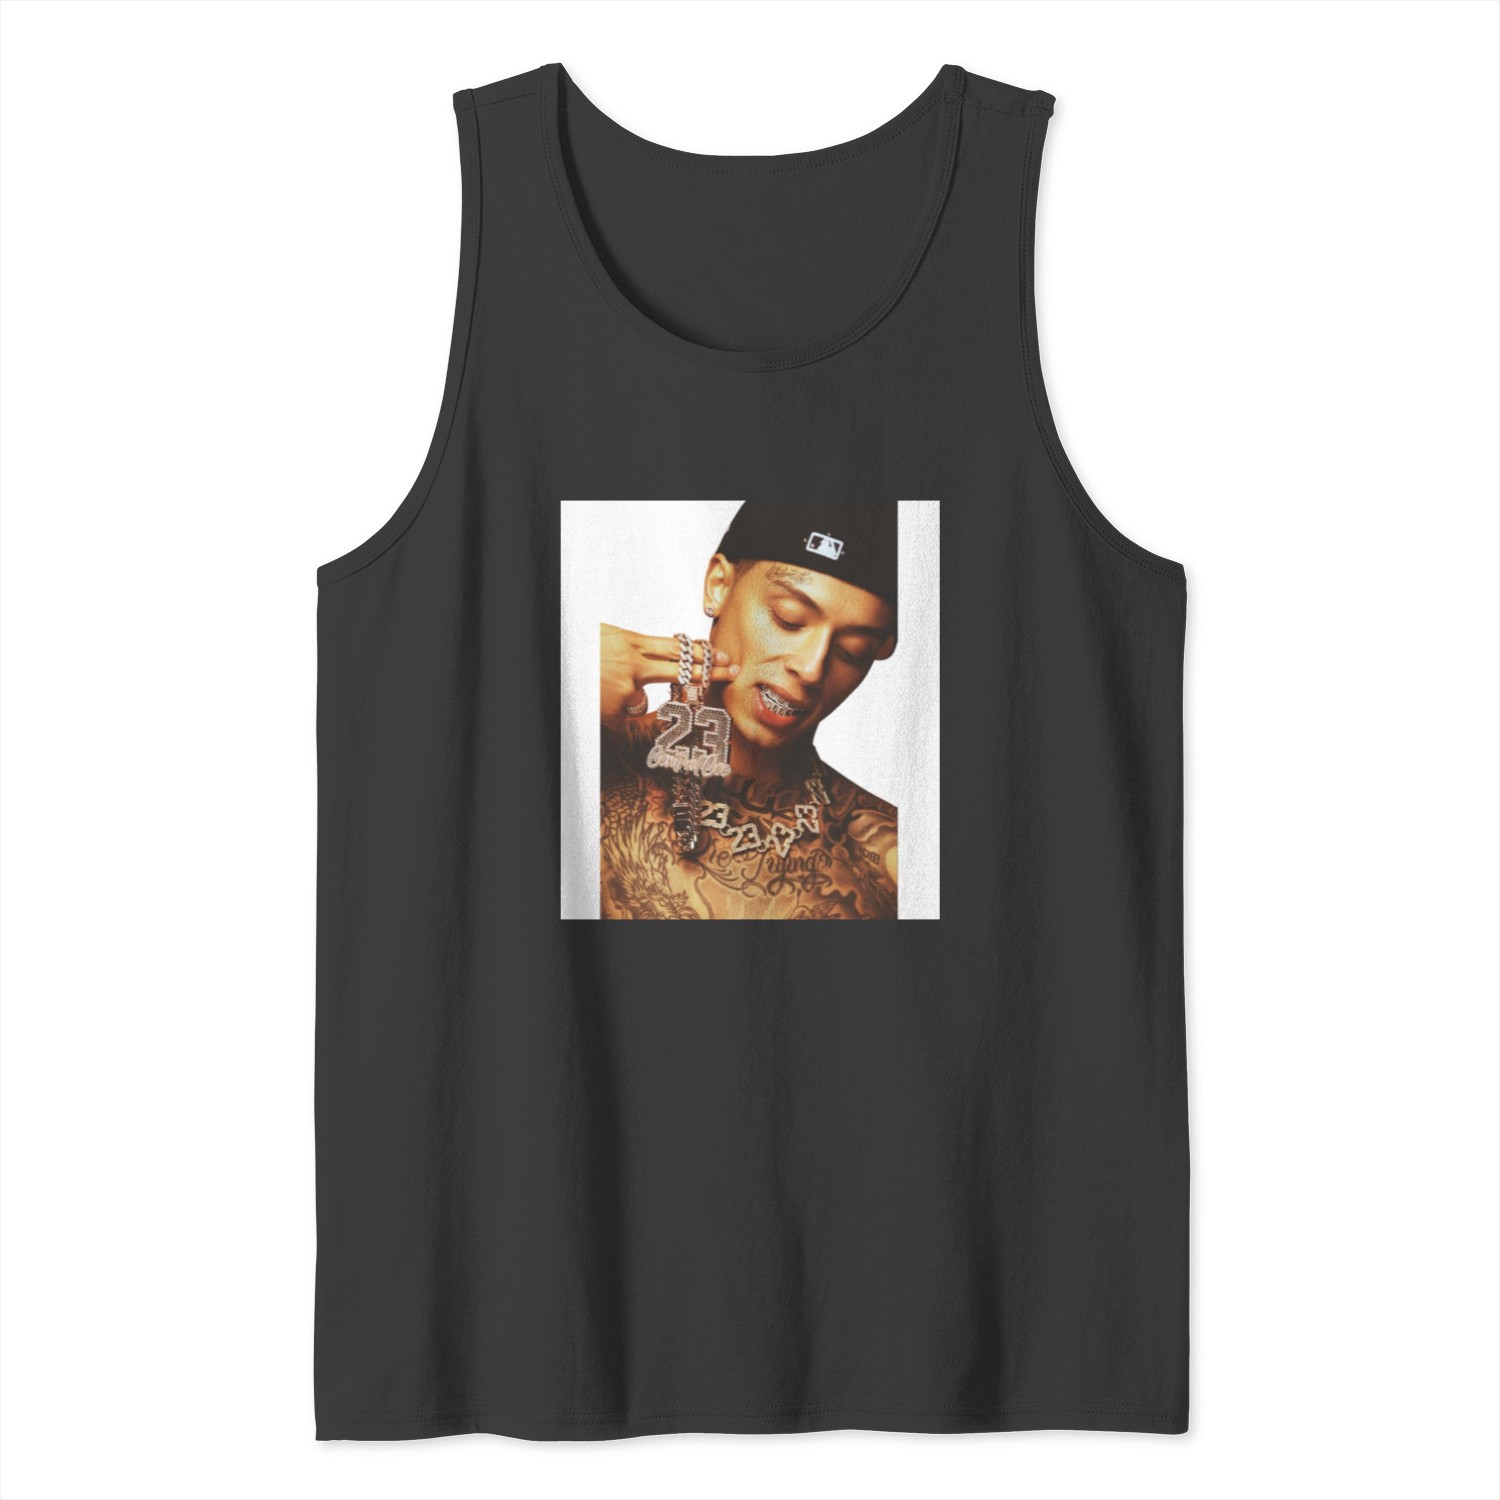 Central Cee Tank Tops